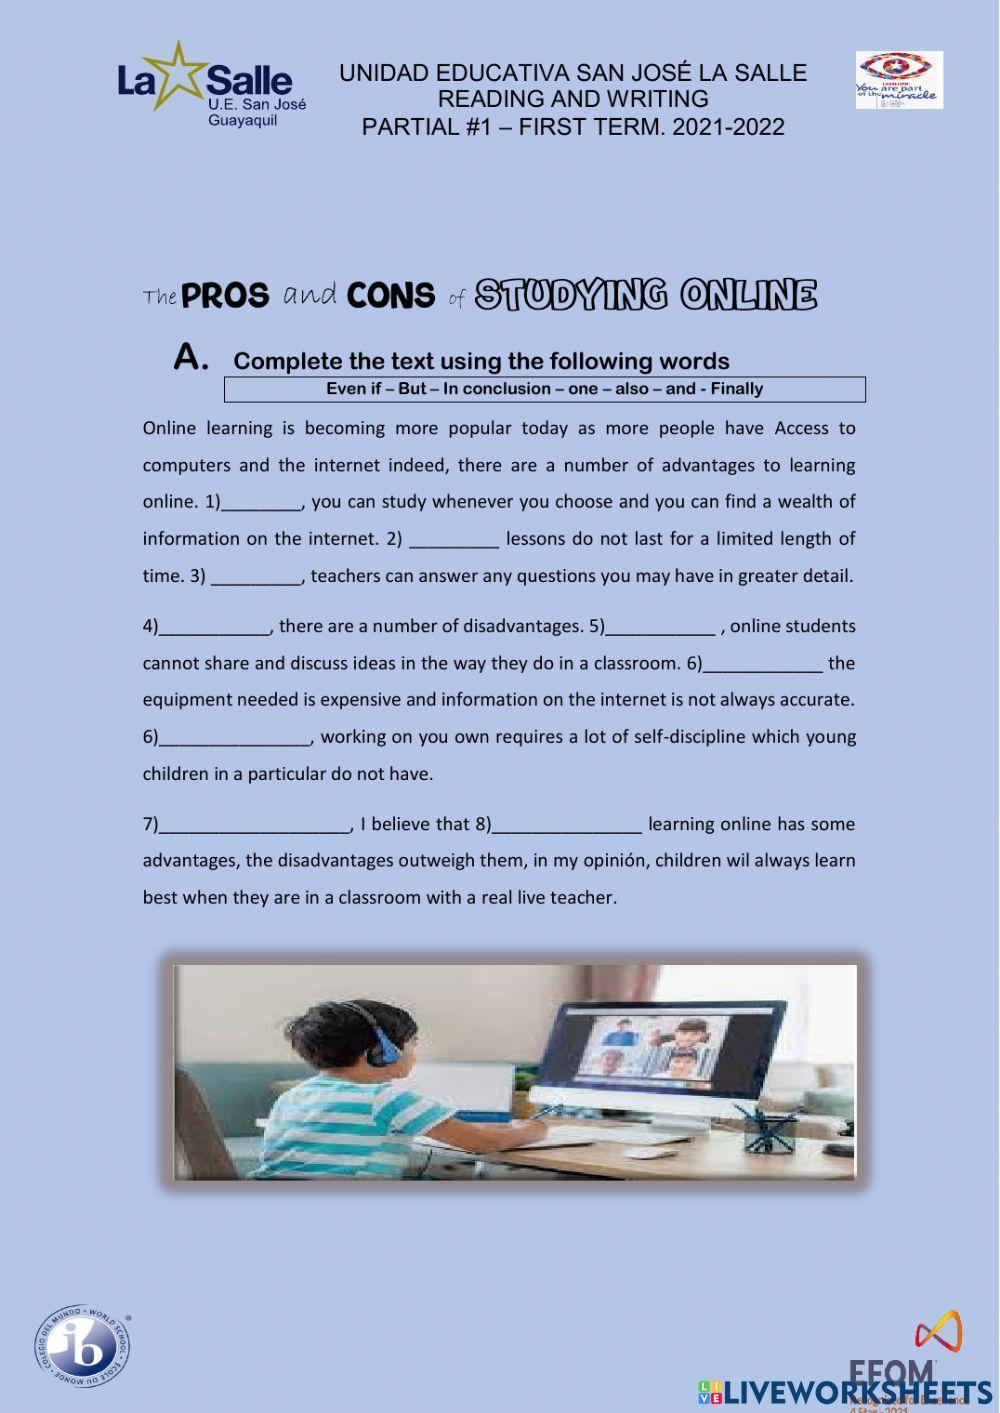 The Pros and Cons of Studying online